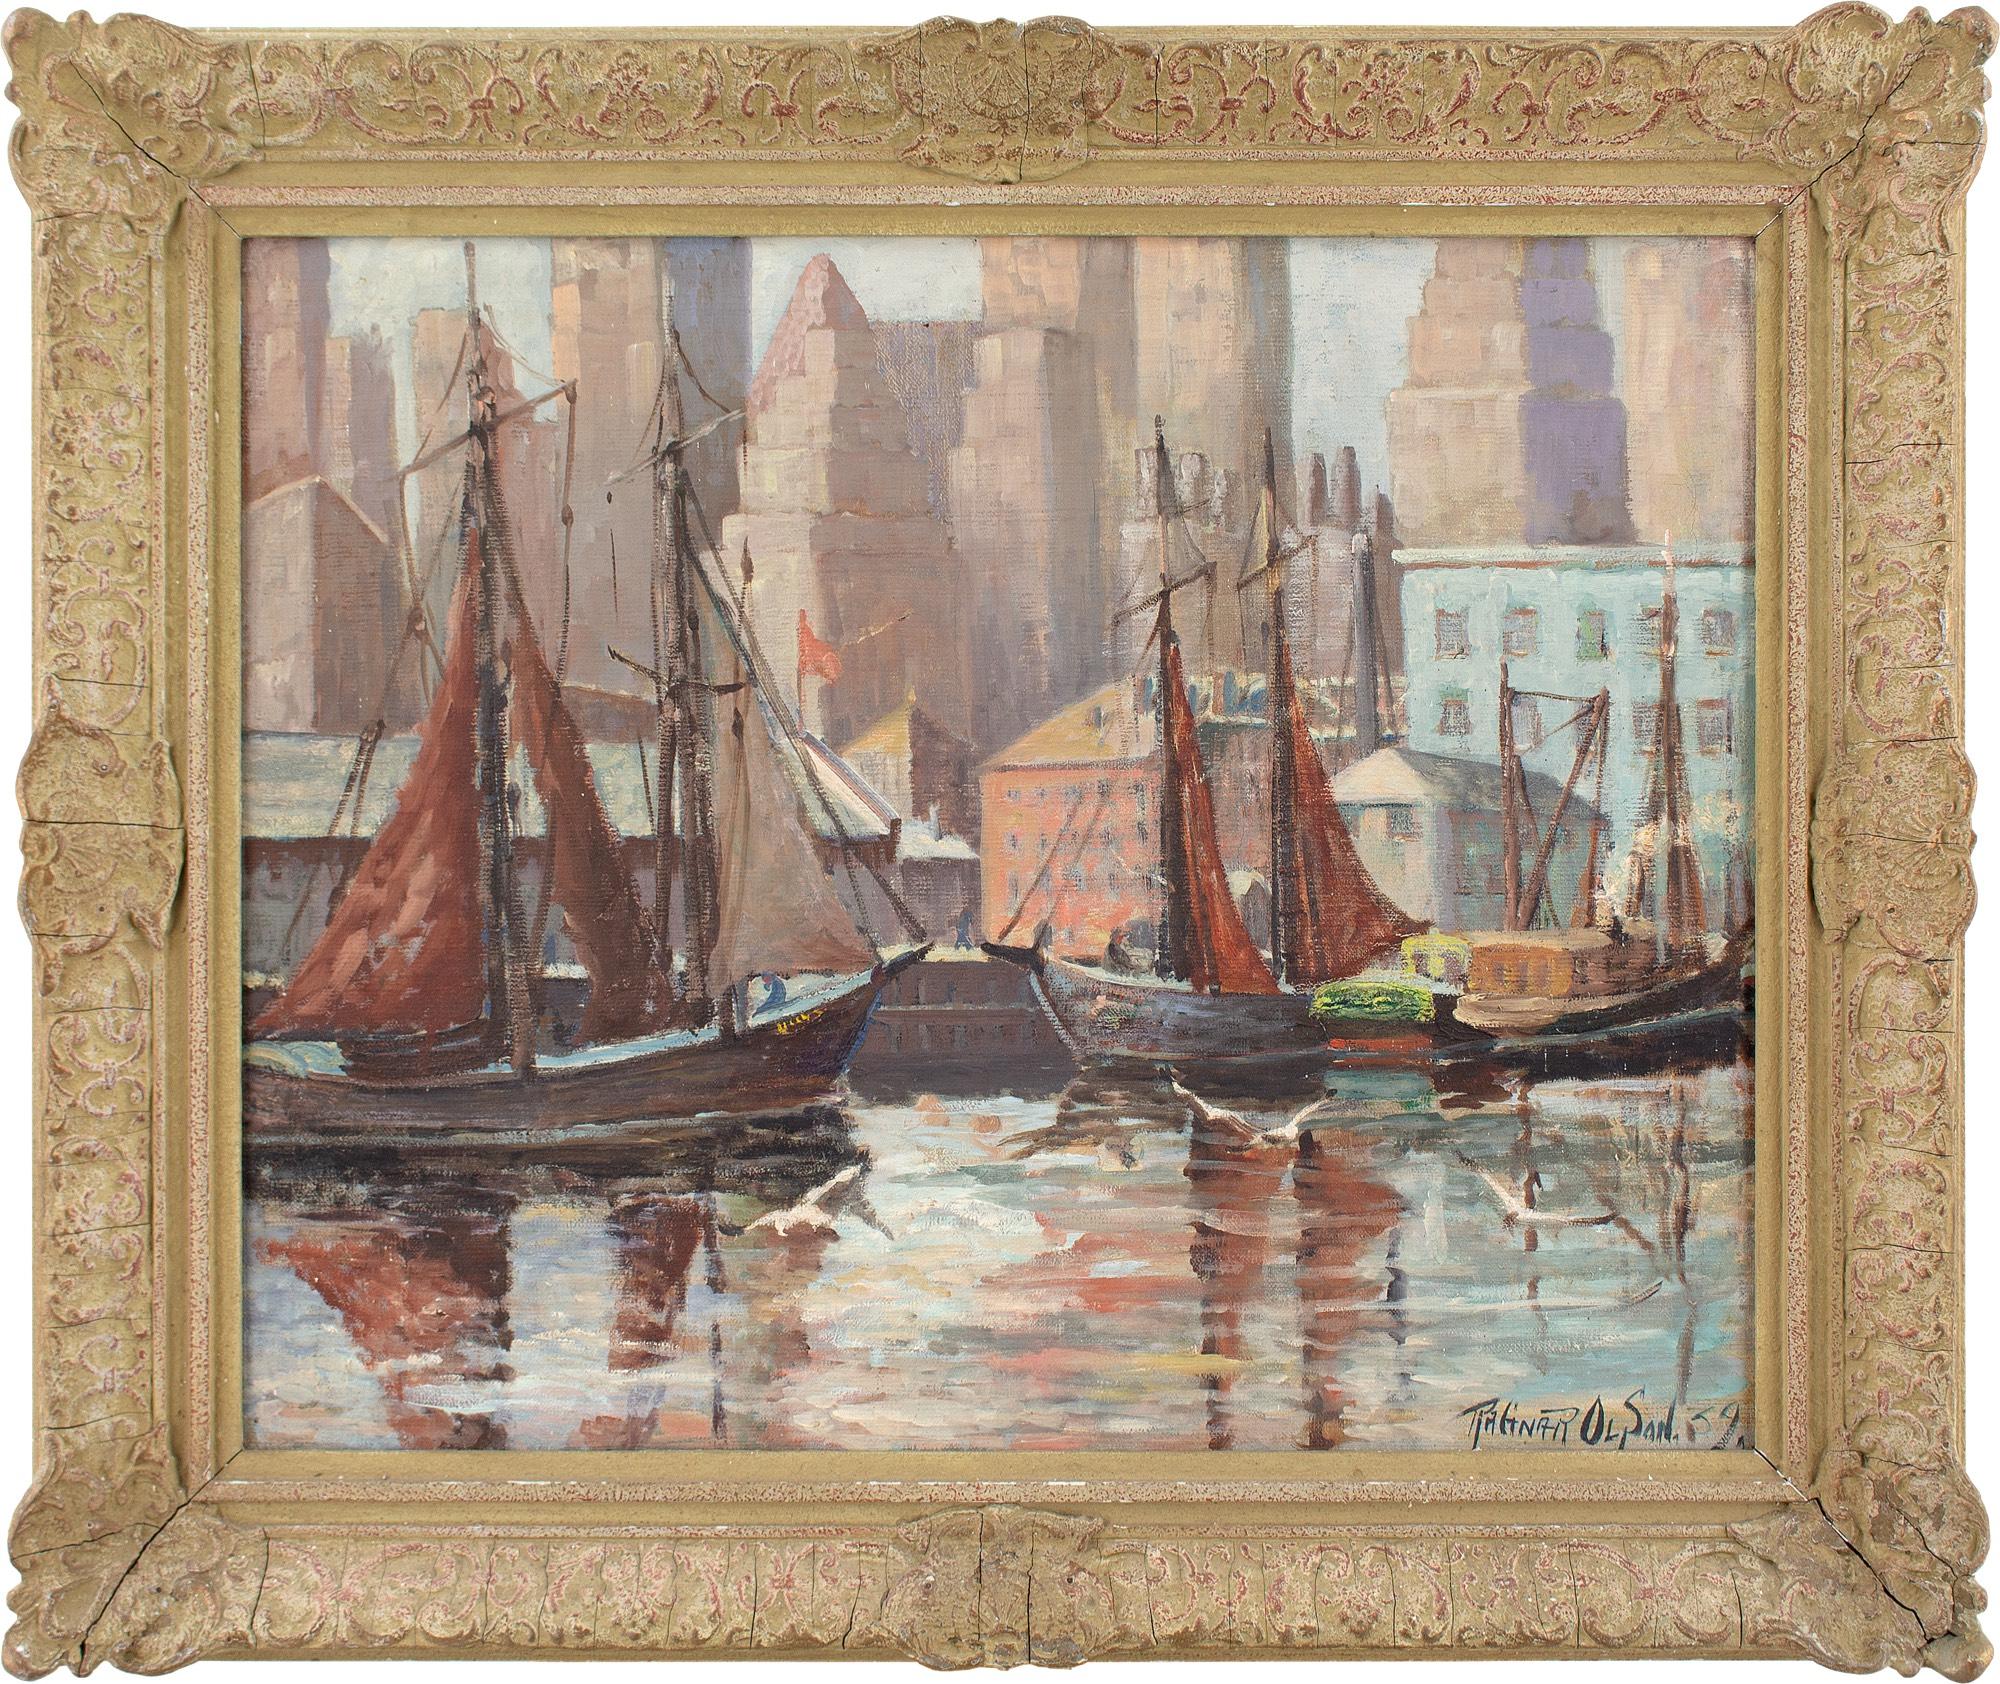 
This early 20th-century oil painting by Swedish-American artist Ragnar Olson (1884-1949) depicts several fishing boats moored at the iconic Fulton Fish Market, New York. The imposing city skyline stands beyond.

Founded in 1807, this busy market